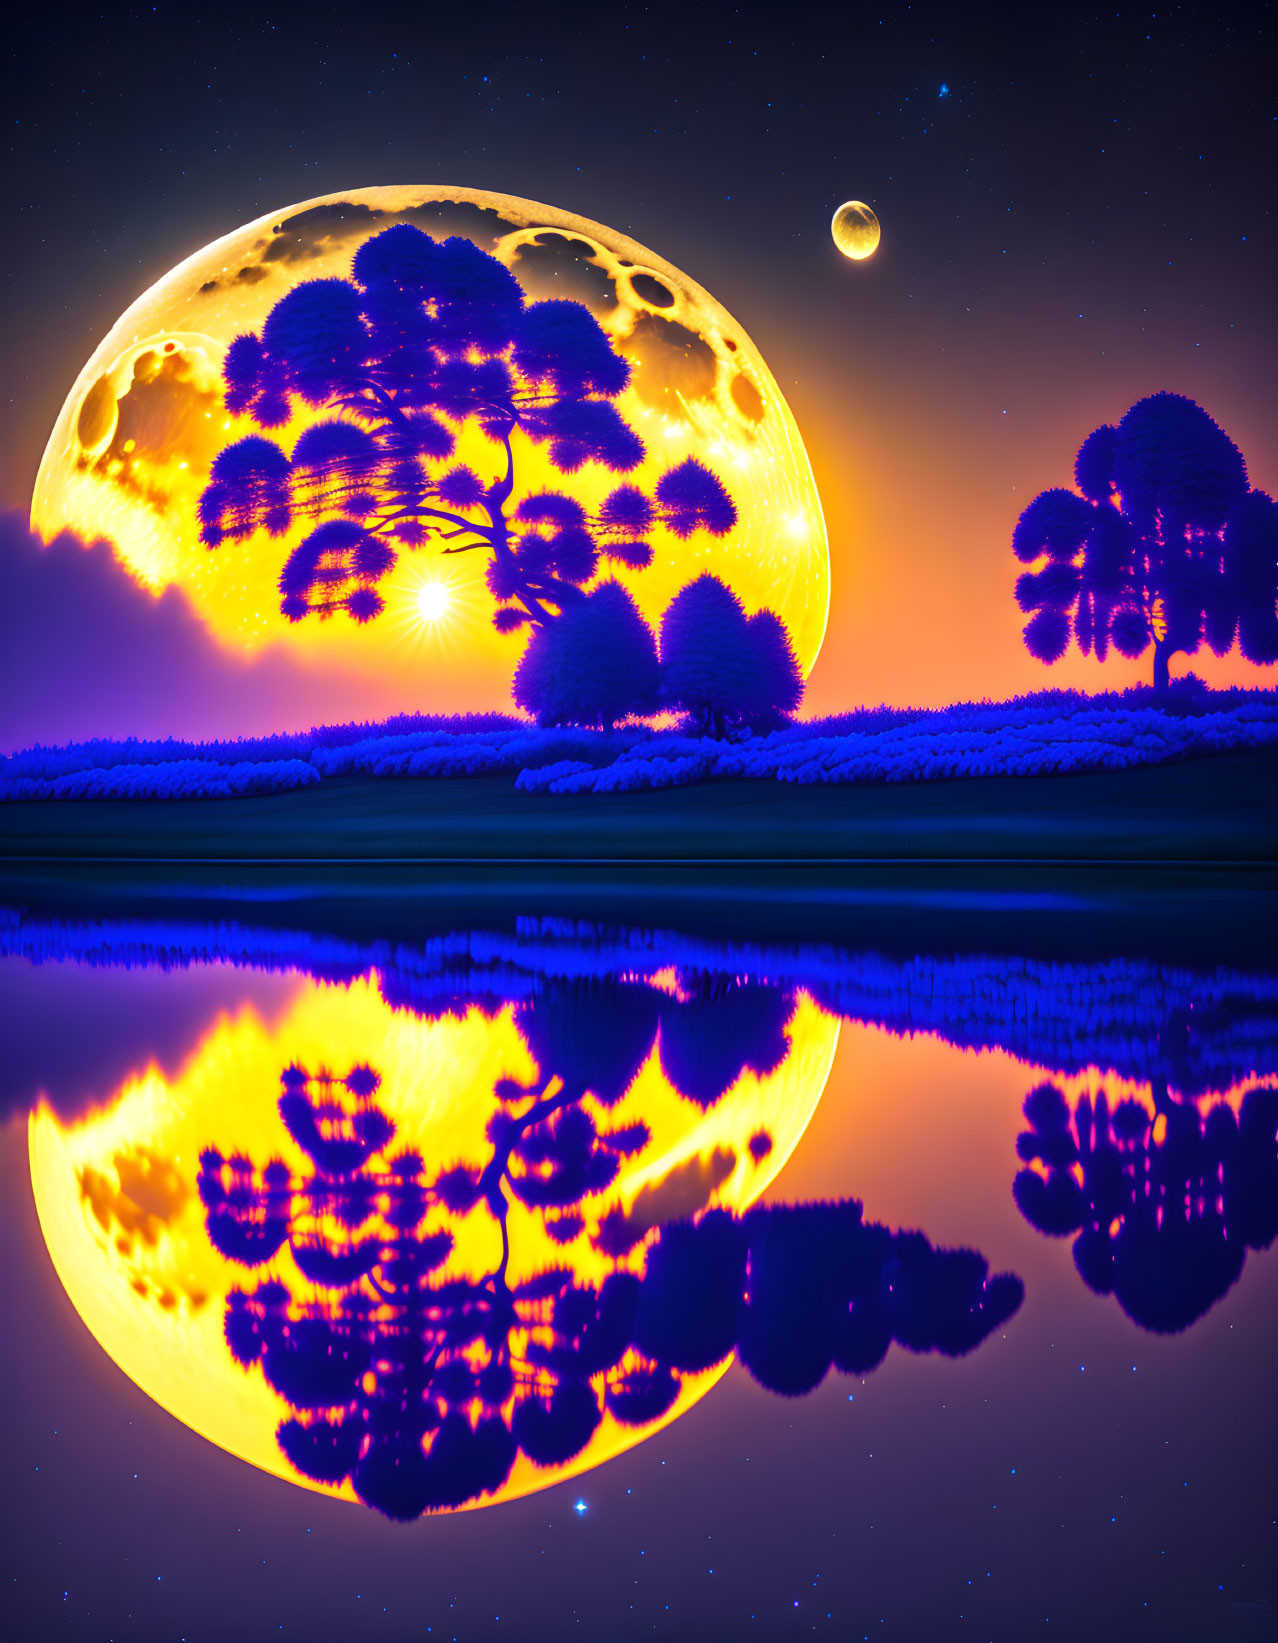 Digital Artwork: Oversized Moon, Clouds, and Sunset Reflections